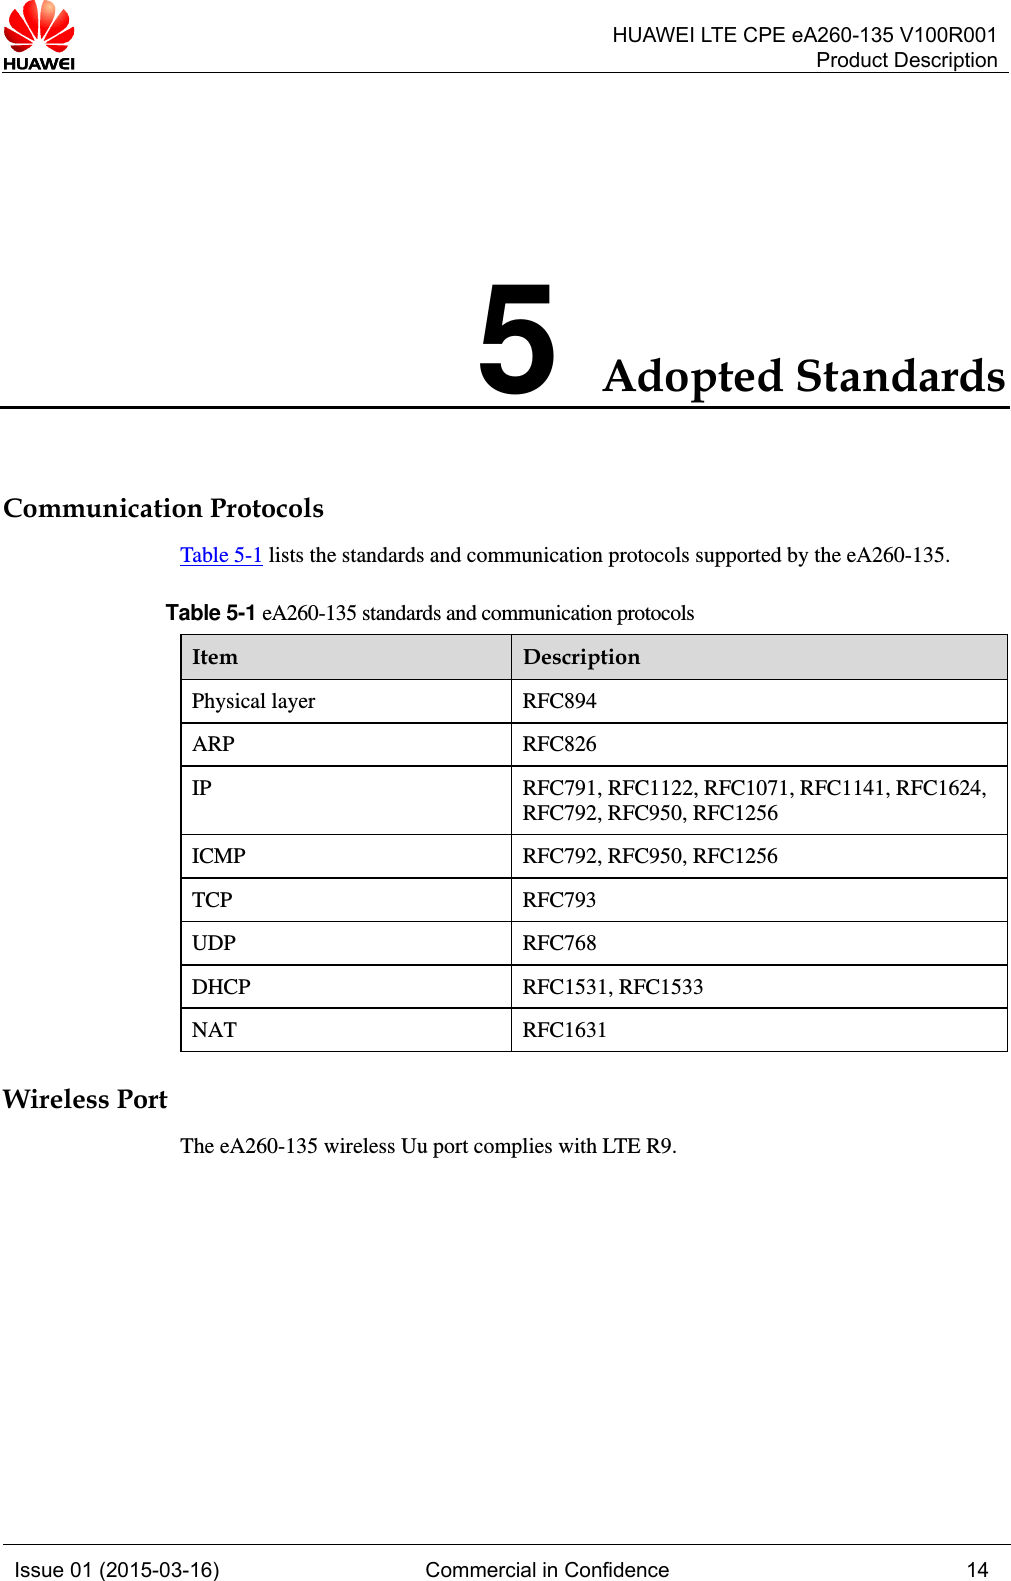  HUAWEI LTE CPE eA260-135 V100R001Product Description Issue 01 (2015-03-16) Commercial in Confidence 14  5 Adopted Standards Communication Protocols Table 5-1 lists the standards and communication protocols supported by the eA260-135.   Table 5-1 eA260-135 standards and communication protocols Item  Description Physical layer  RFC894 ARP RFC826 IP RFC791, RFC1122, RFC1071, RFC1141, RFC1624, RFC792, RFC950, RFC1256 ICMP RFC792, RFC950, RFC1256 TCP RFC793 UDP RFC768 DHCP RFC1531, RFC1533 NAT RFC1631 Wireless Port The eA260-135 wireless Uu port complies with LTE R9. 